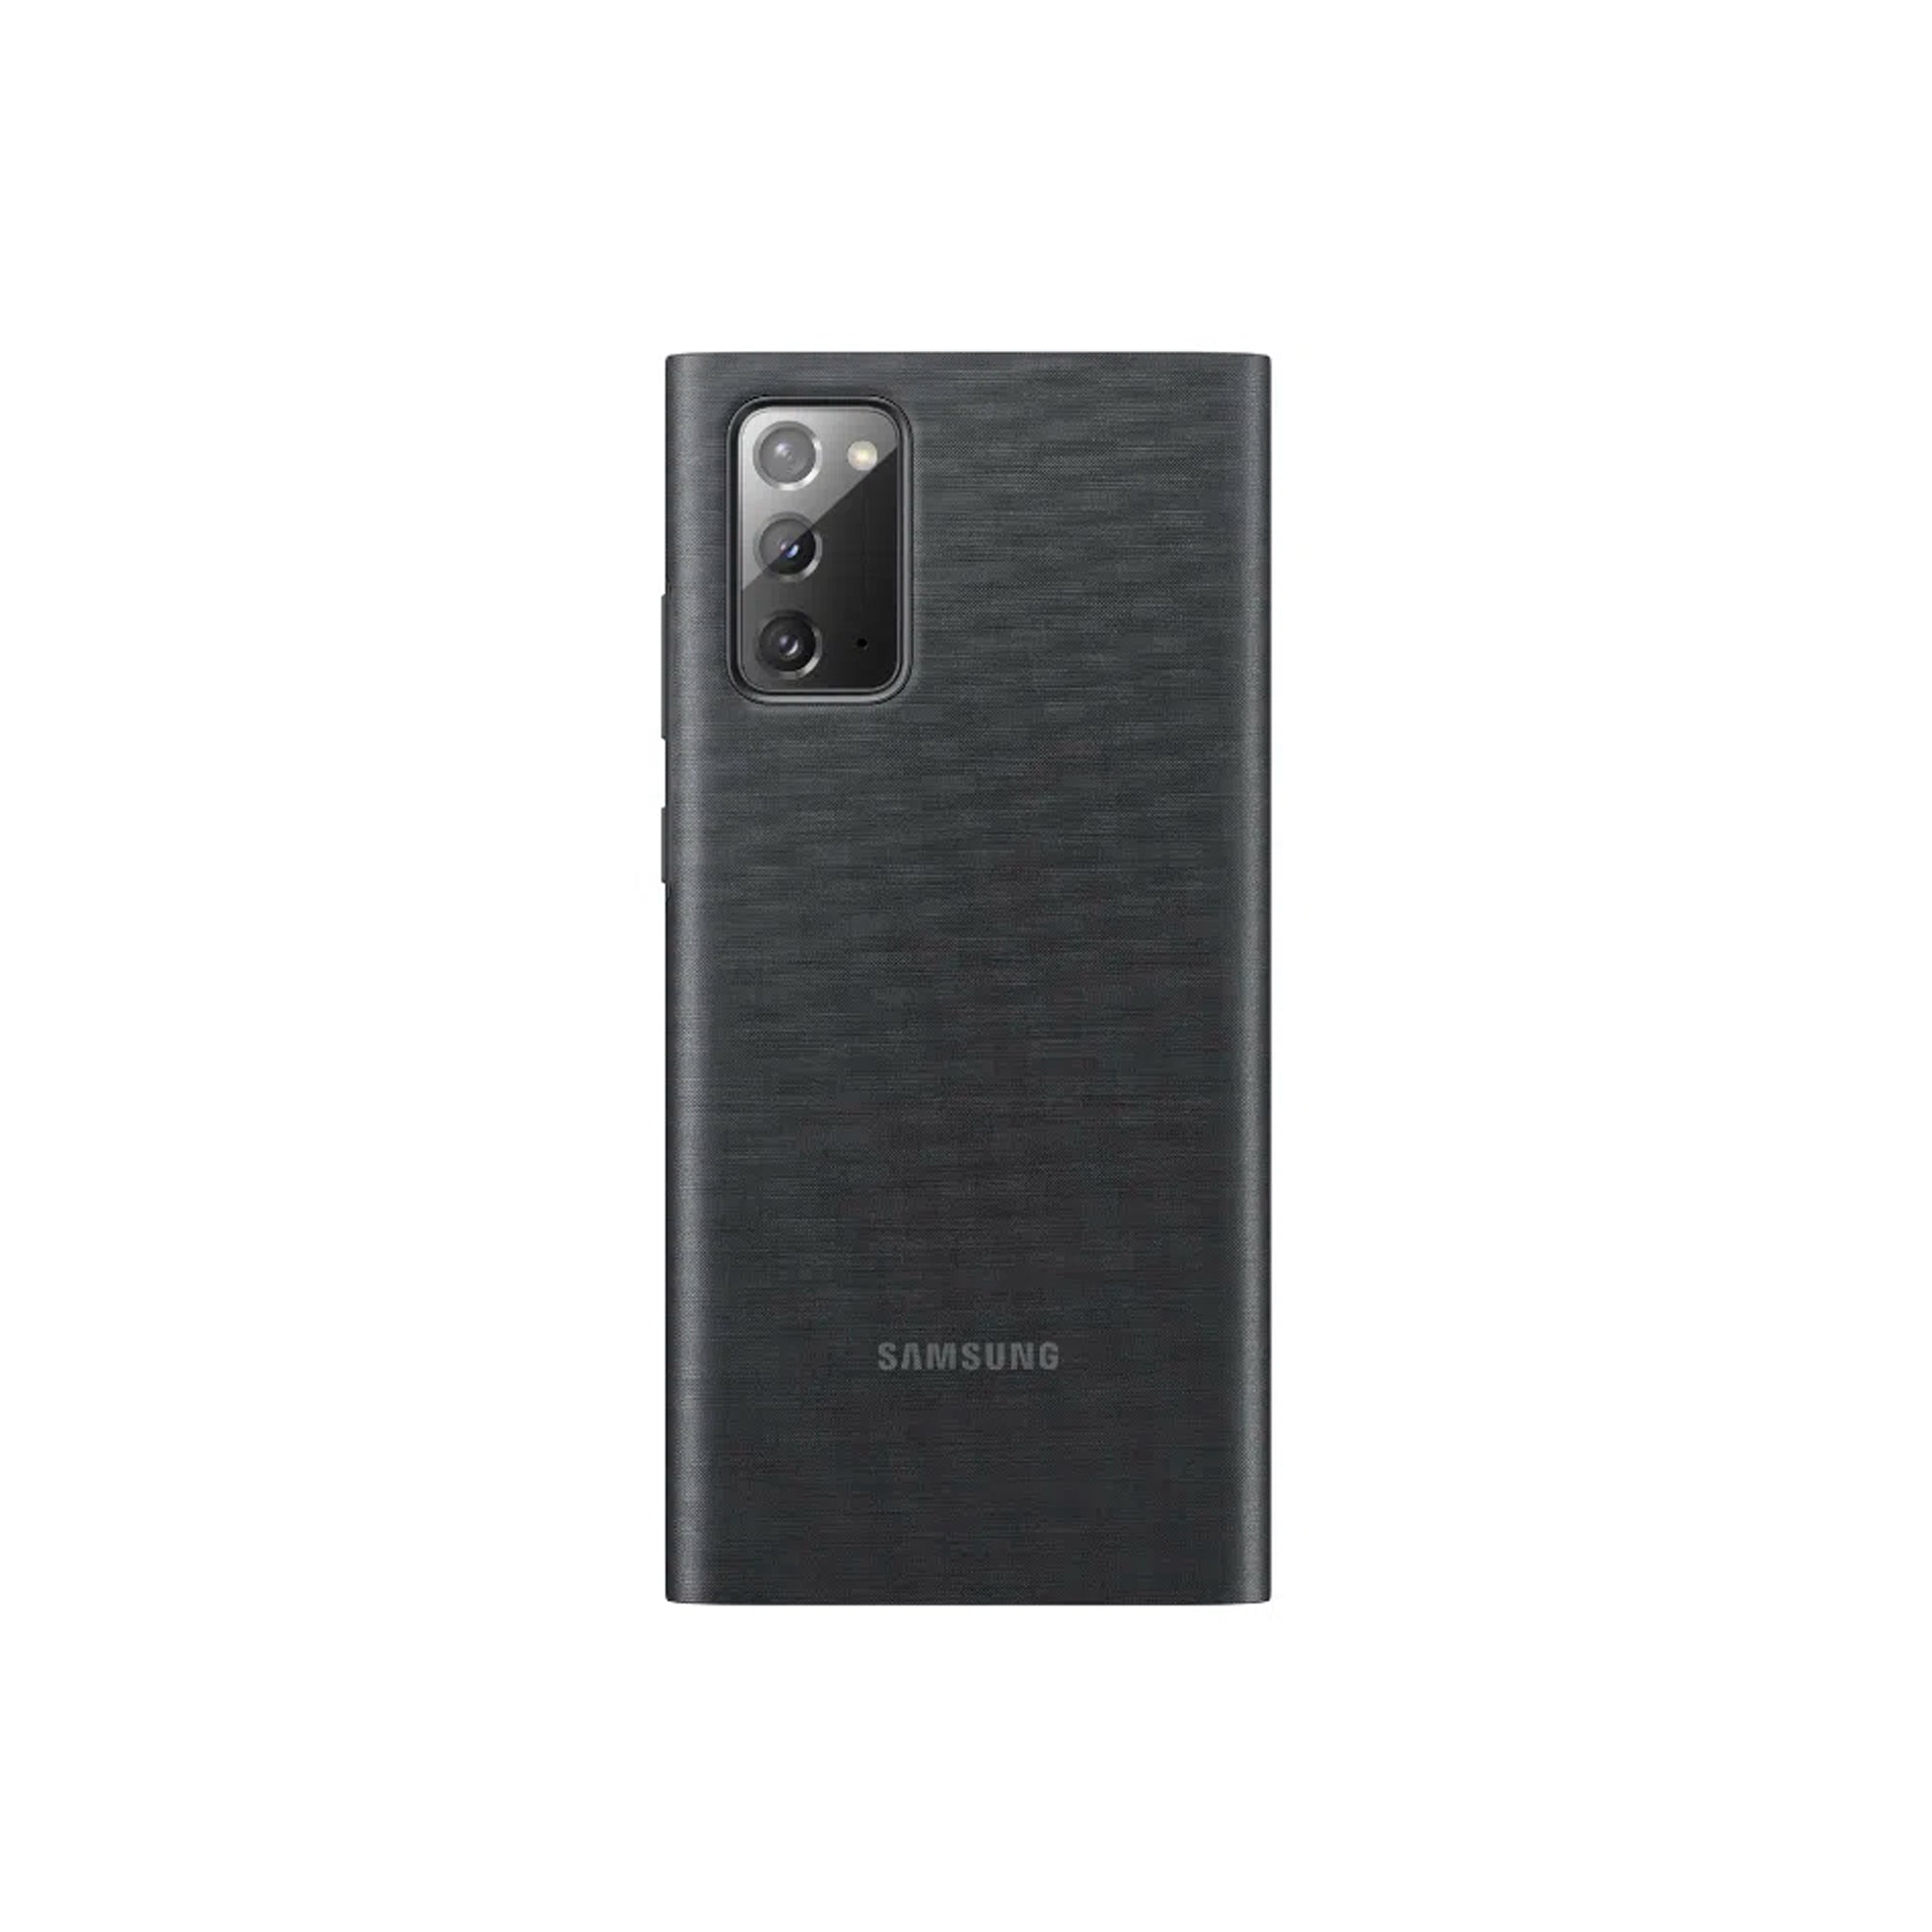 Samsung - Galaxy Note 20 (N980) LED View Cover - Black